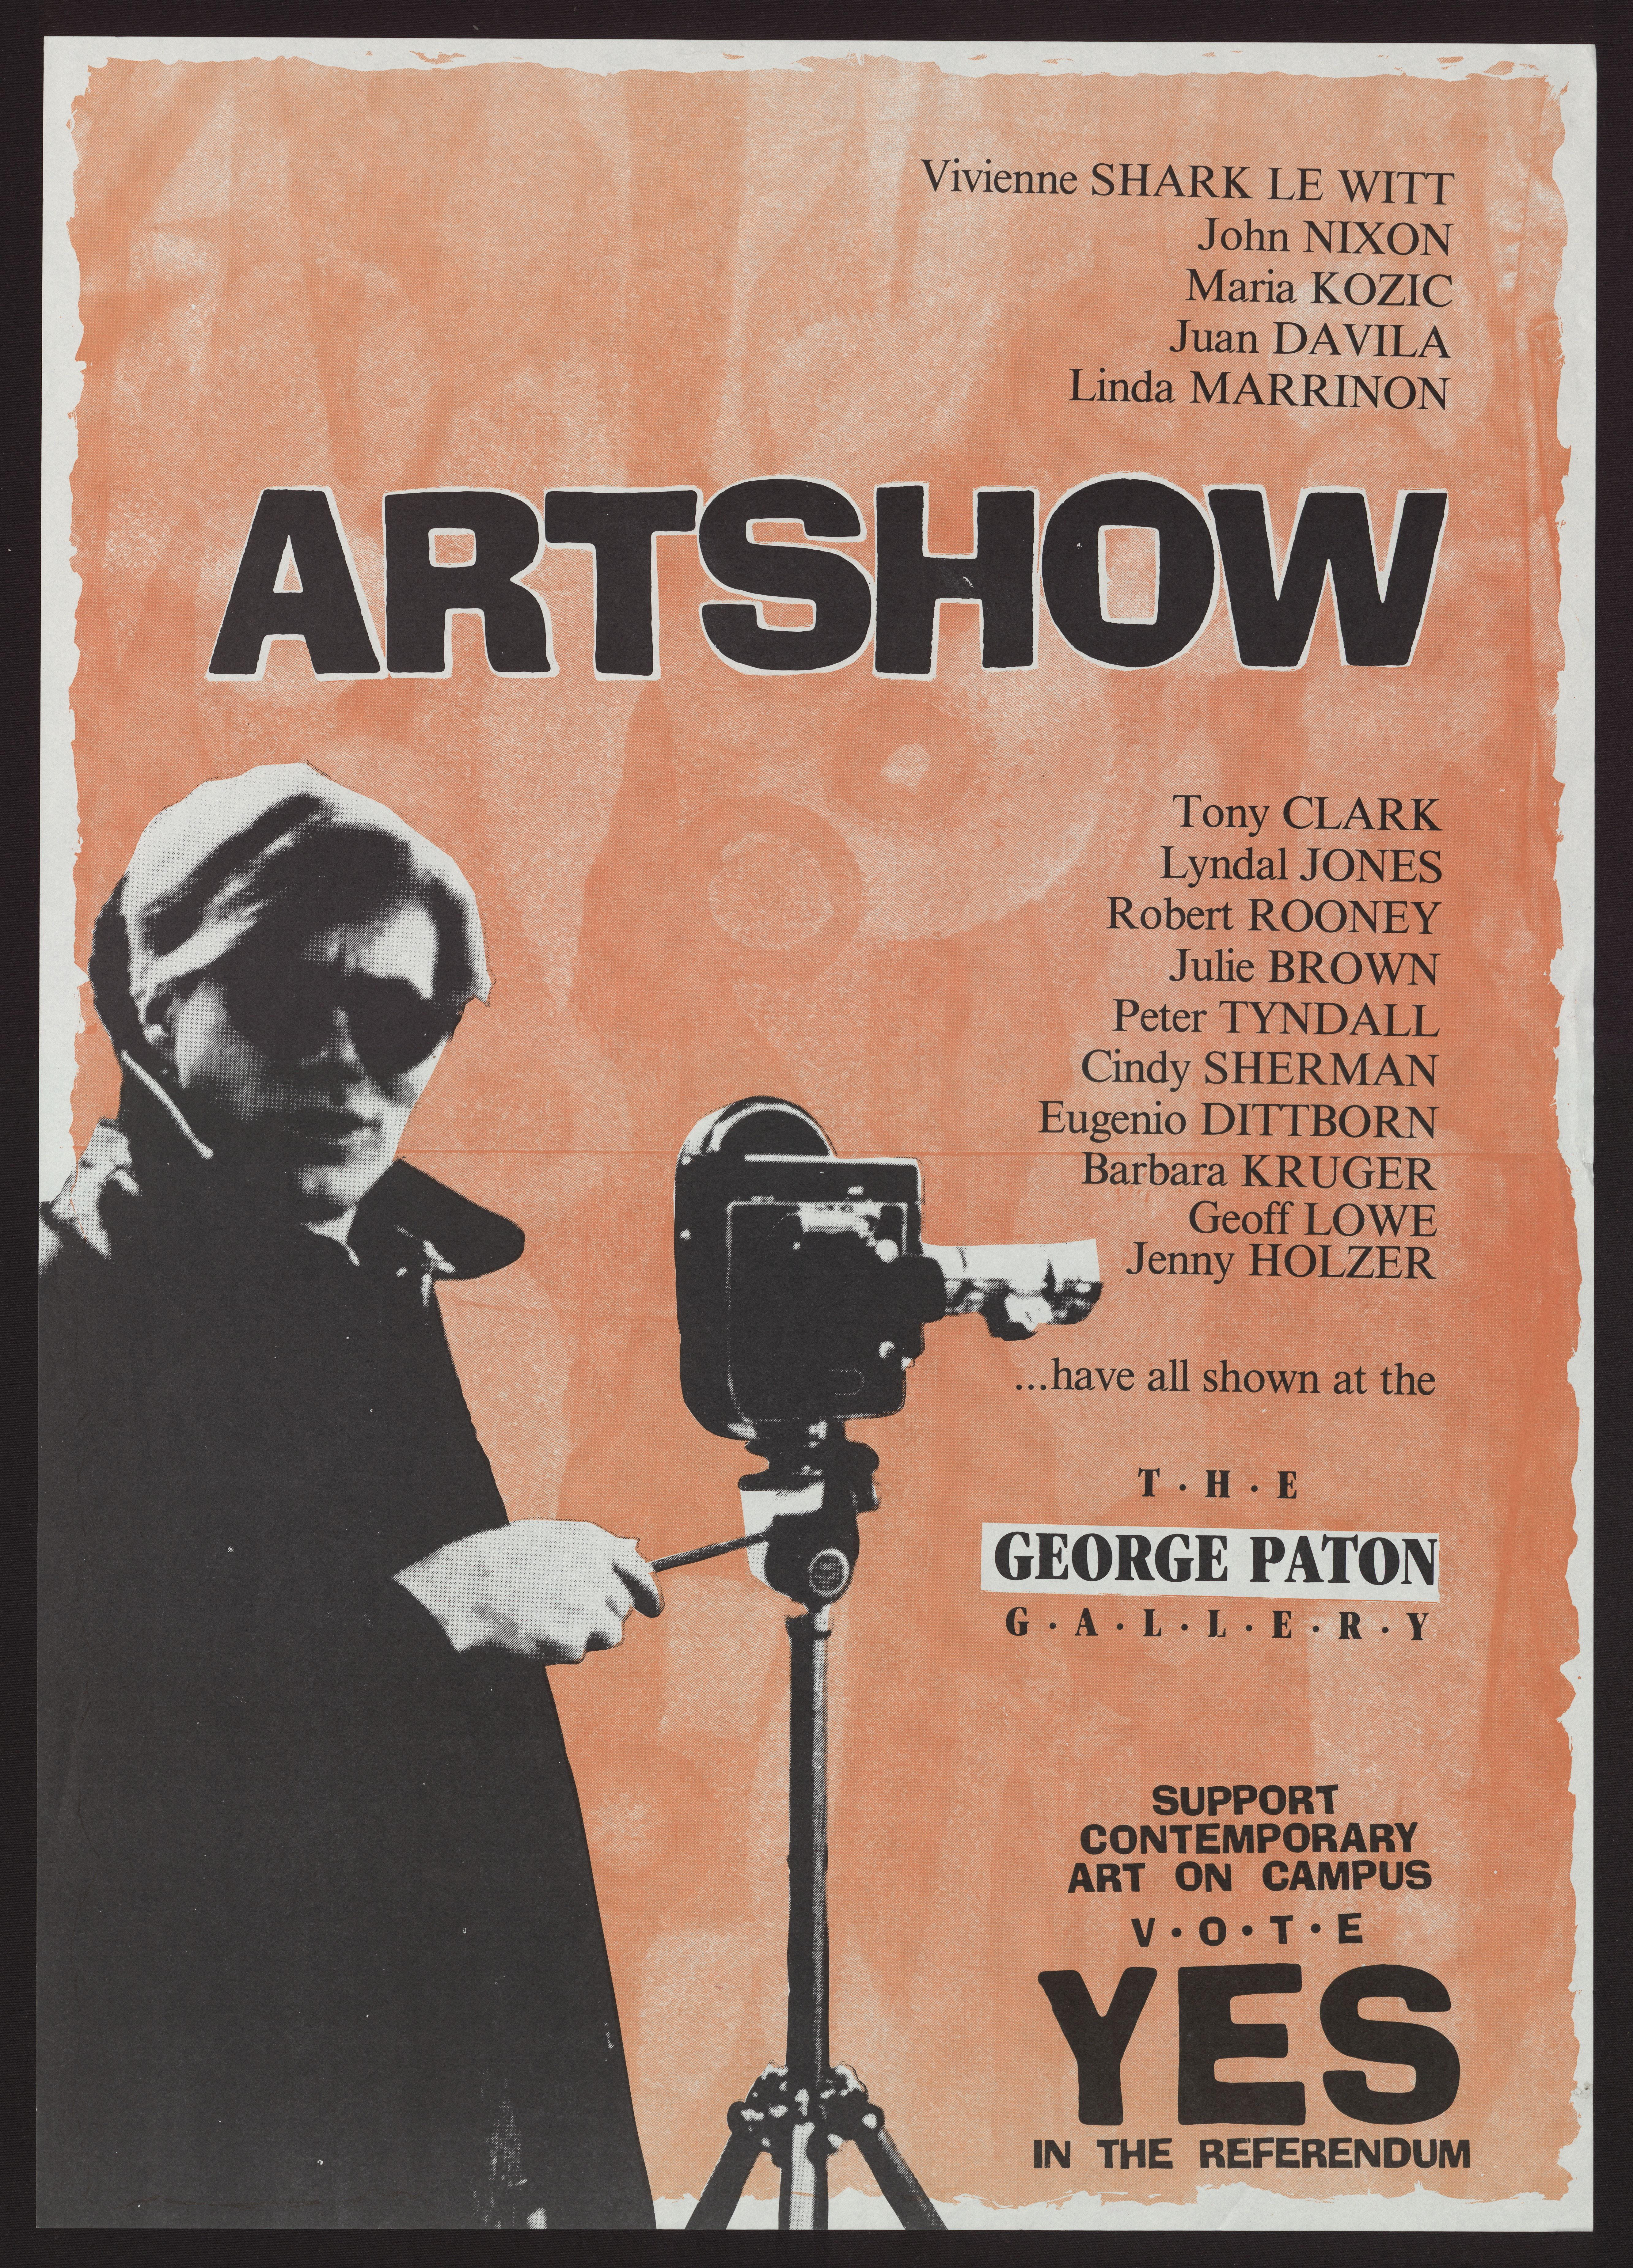 Poster Art Show  c.1986 On September 28 1985, the Union Board voted to close the George Paton Gallery, however due to a variety of legal obligations, such as existing contracts with staff, the decision was reversed by the Vice Chancellor and a reprieve was granted to August 1986. In the interim the fate of the gallery was to be decided by two referenda of the student body.  George Paton Gallery Collection, 1990.0144.0534  University of Melbourne Archives 